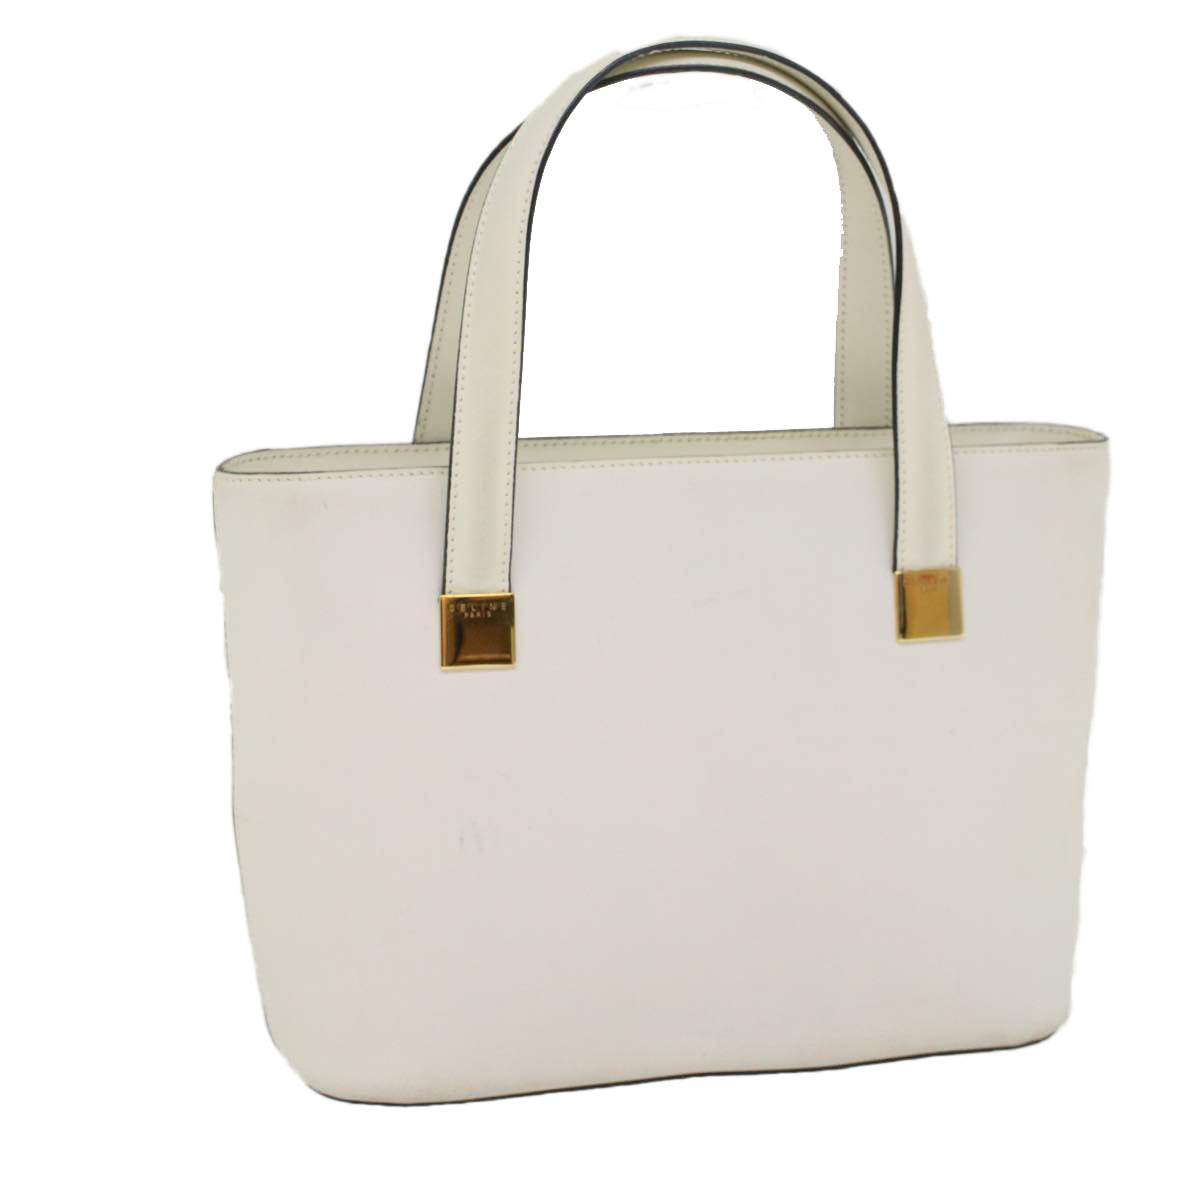 CELINE Tote Bag Leather White Auth bs7871